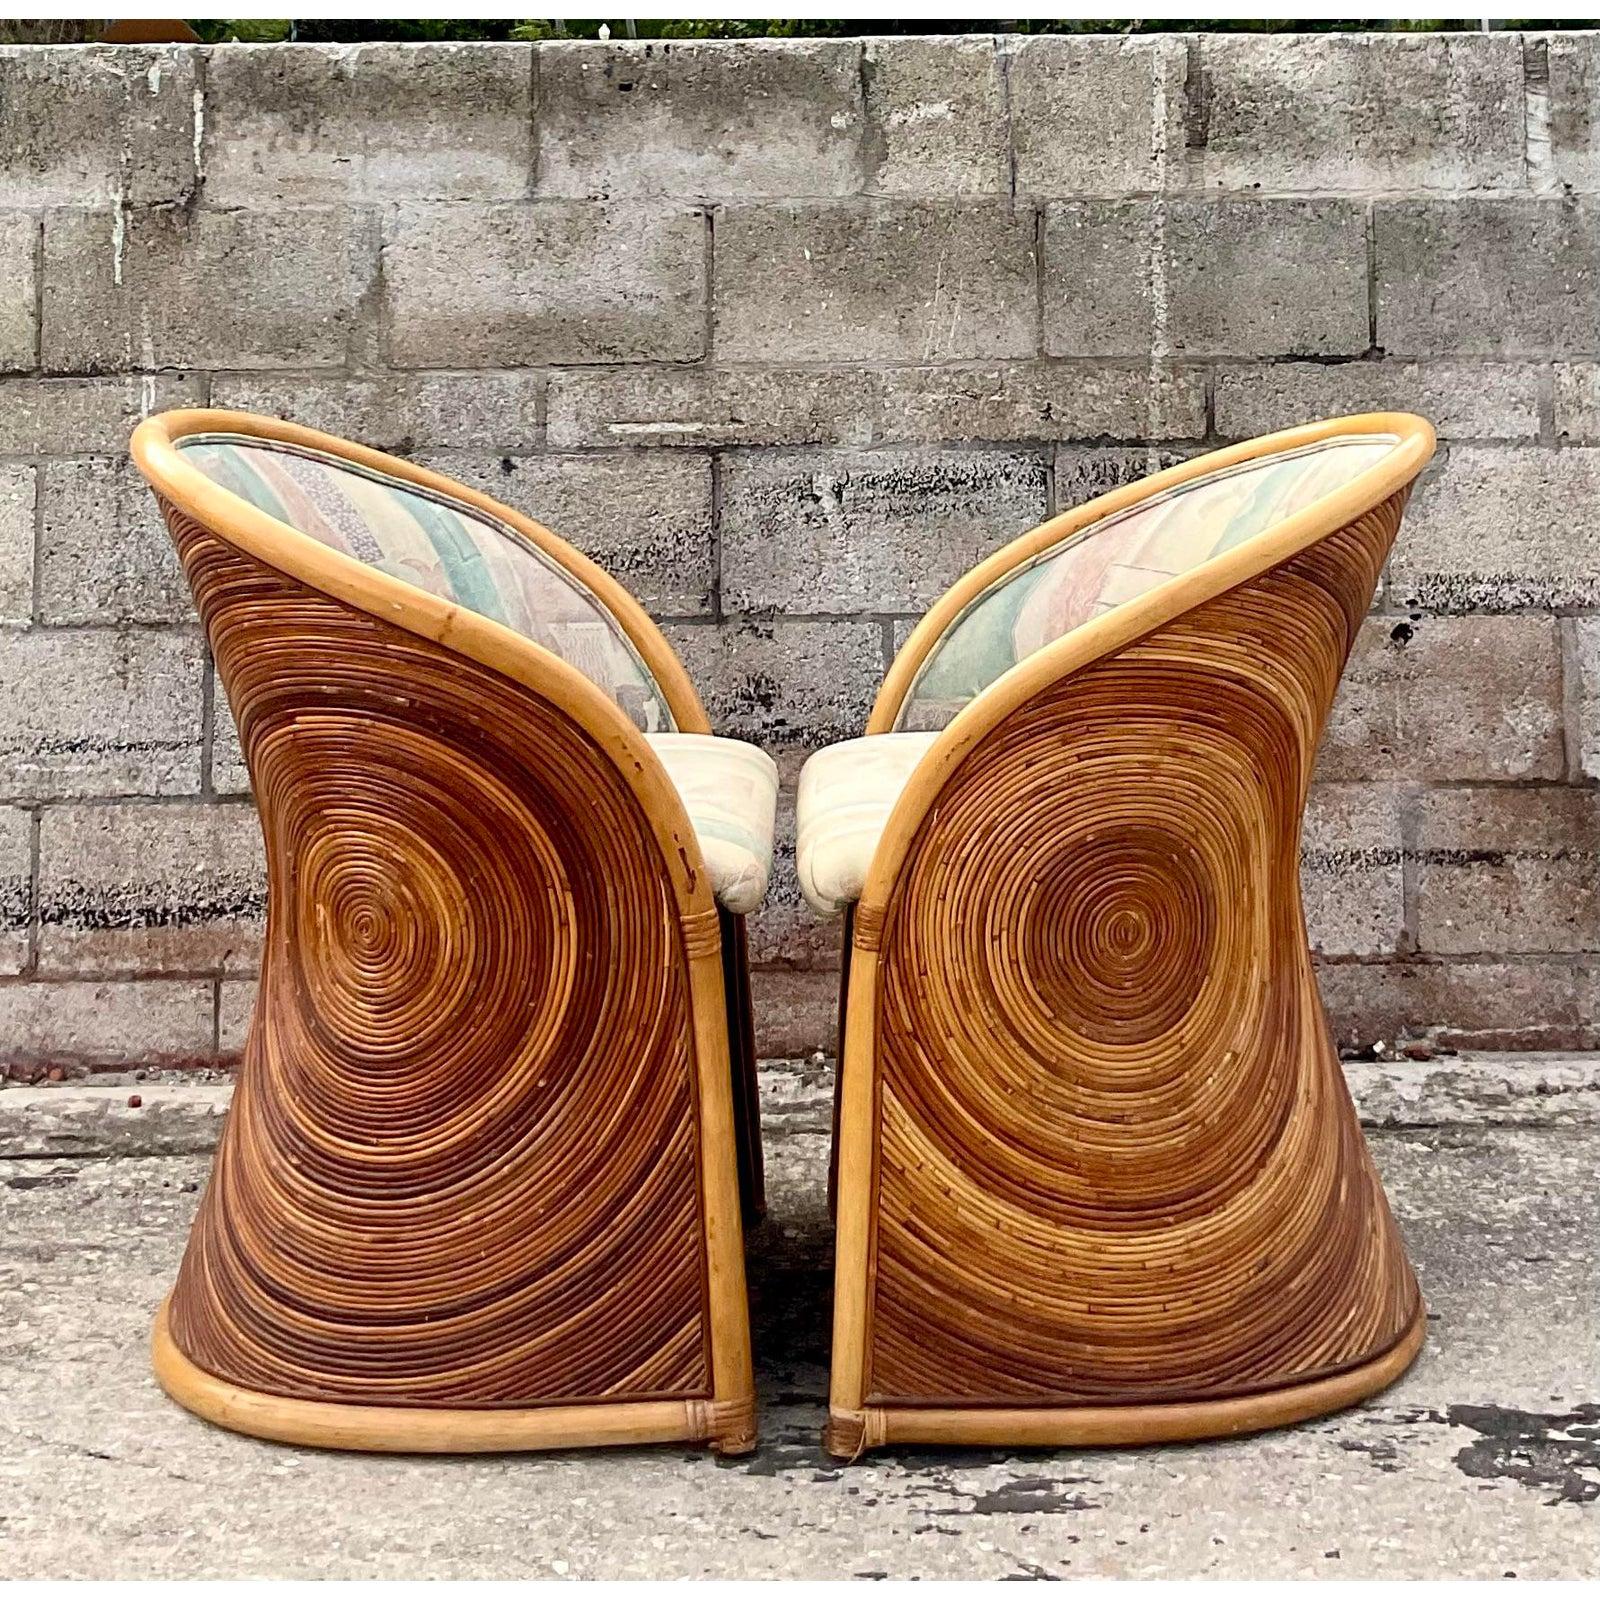 pencil reed chair